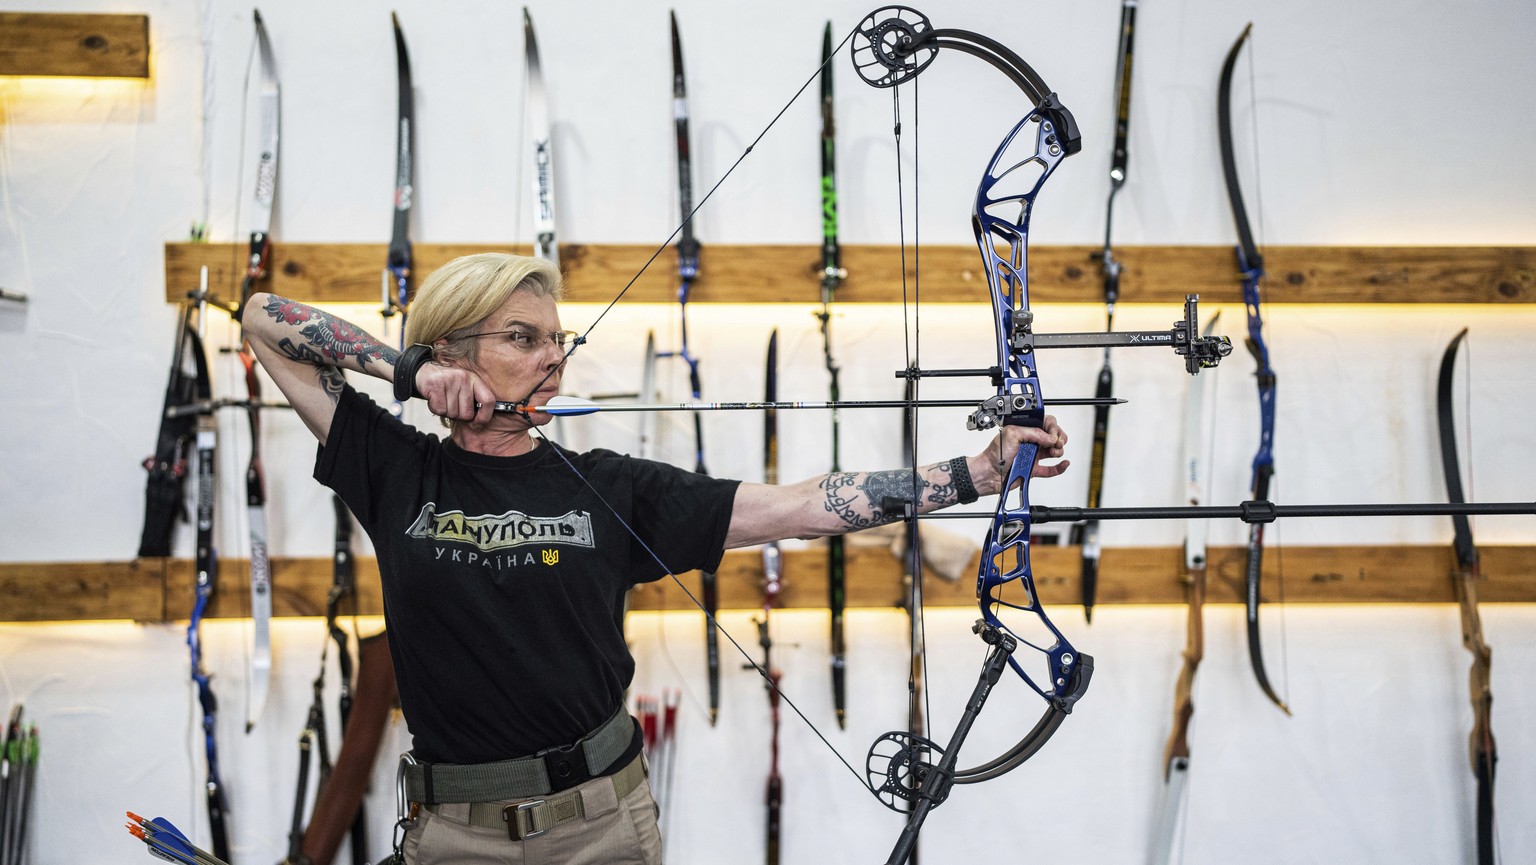 Ukrainian medic Yuliia Paievska, known as Taira, shoots a bow during the archery training in Kyiv, Ukraine, on Friday, July 8, 2022. The celebrated Ukrainian medic who was held captive by Russian forc ...